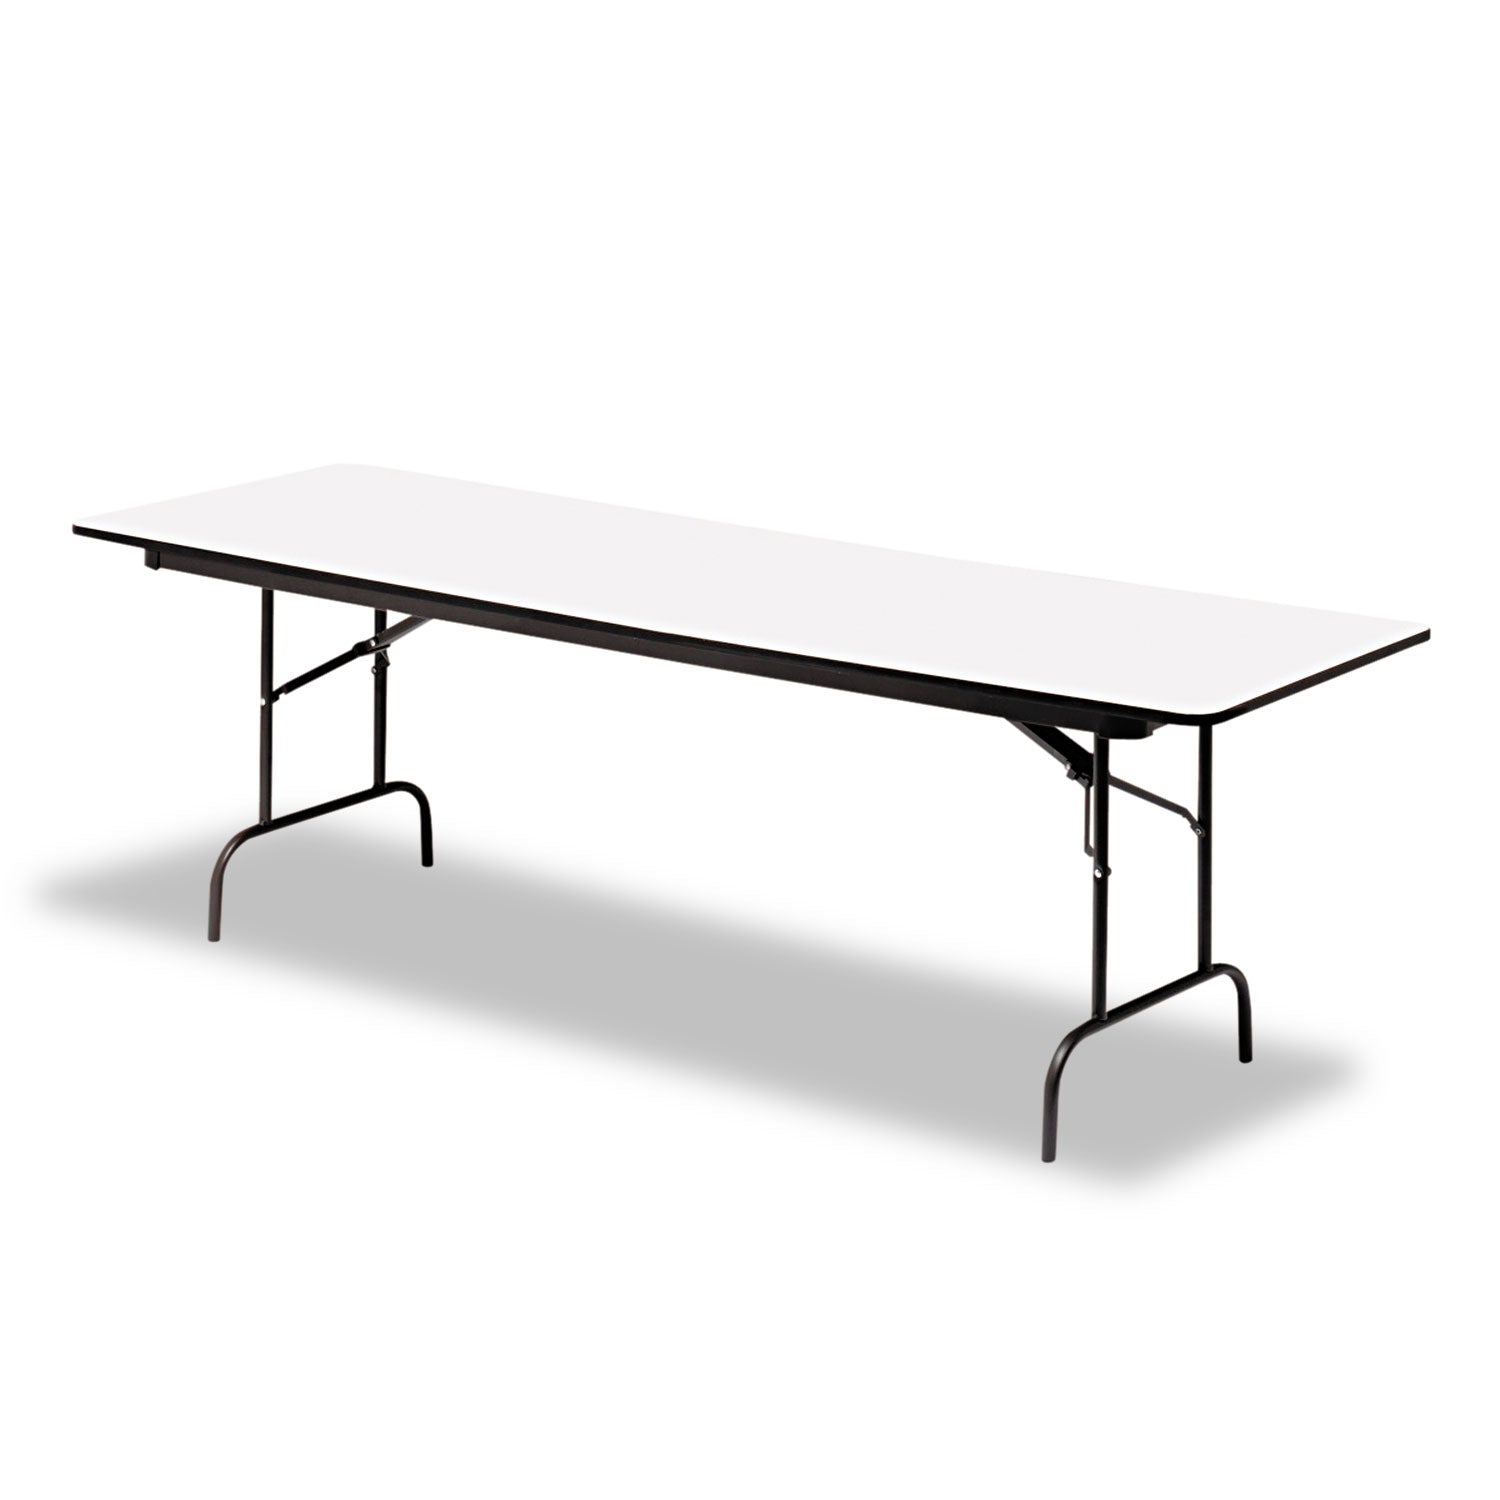 OfficeWorks Commercial Wood-Laminate Folding Table, Rectangular, 72" x 30" x 29", Gray/Charcoal - 